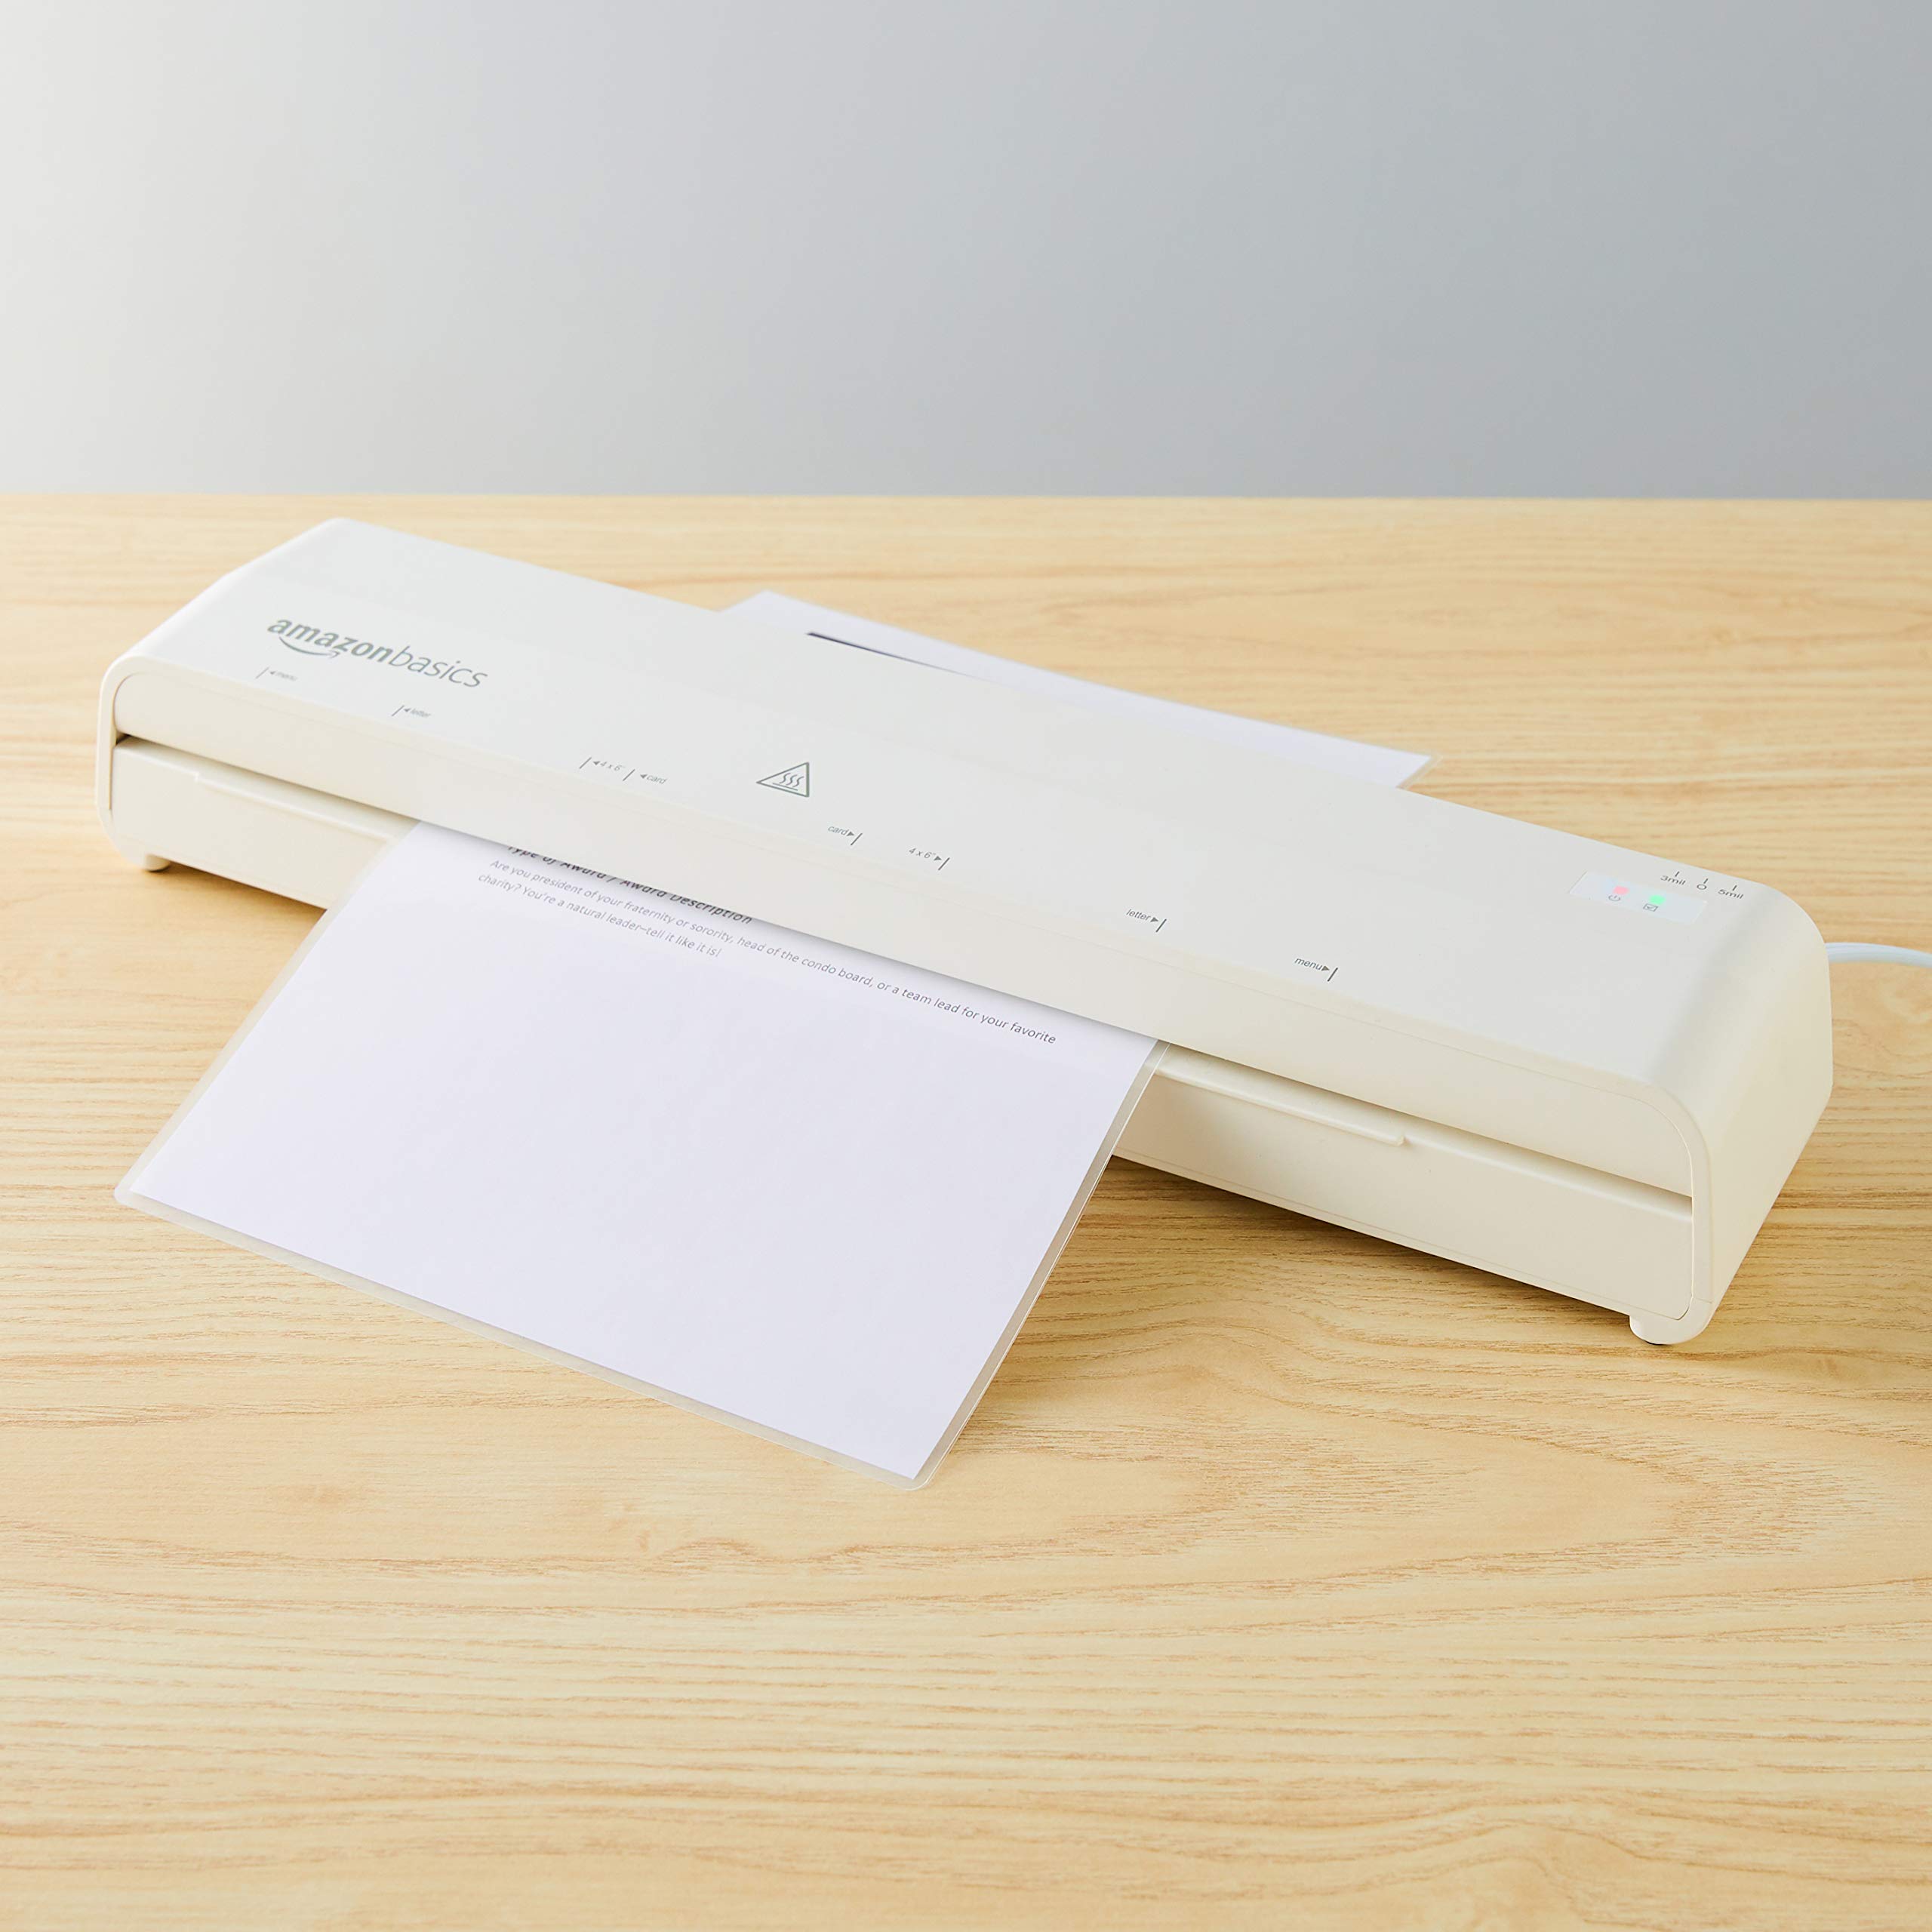 Amazon Basics 12-Inch Thermal Laminator Machine with Rapid Warm-Up (1 min), 20 Assorted Laminating Pouches Included, White